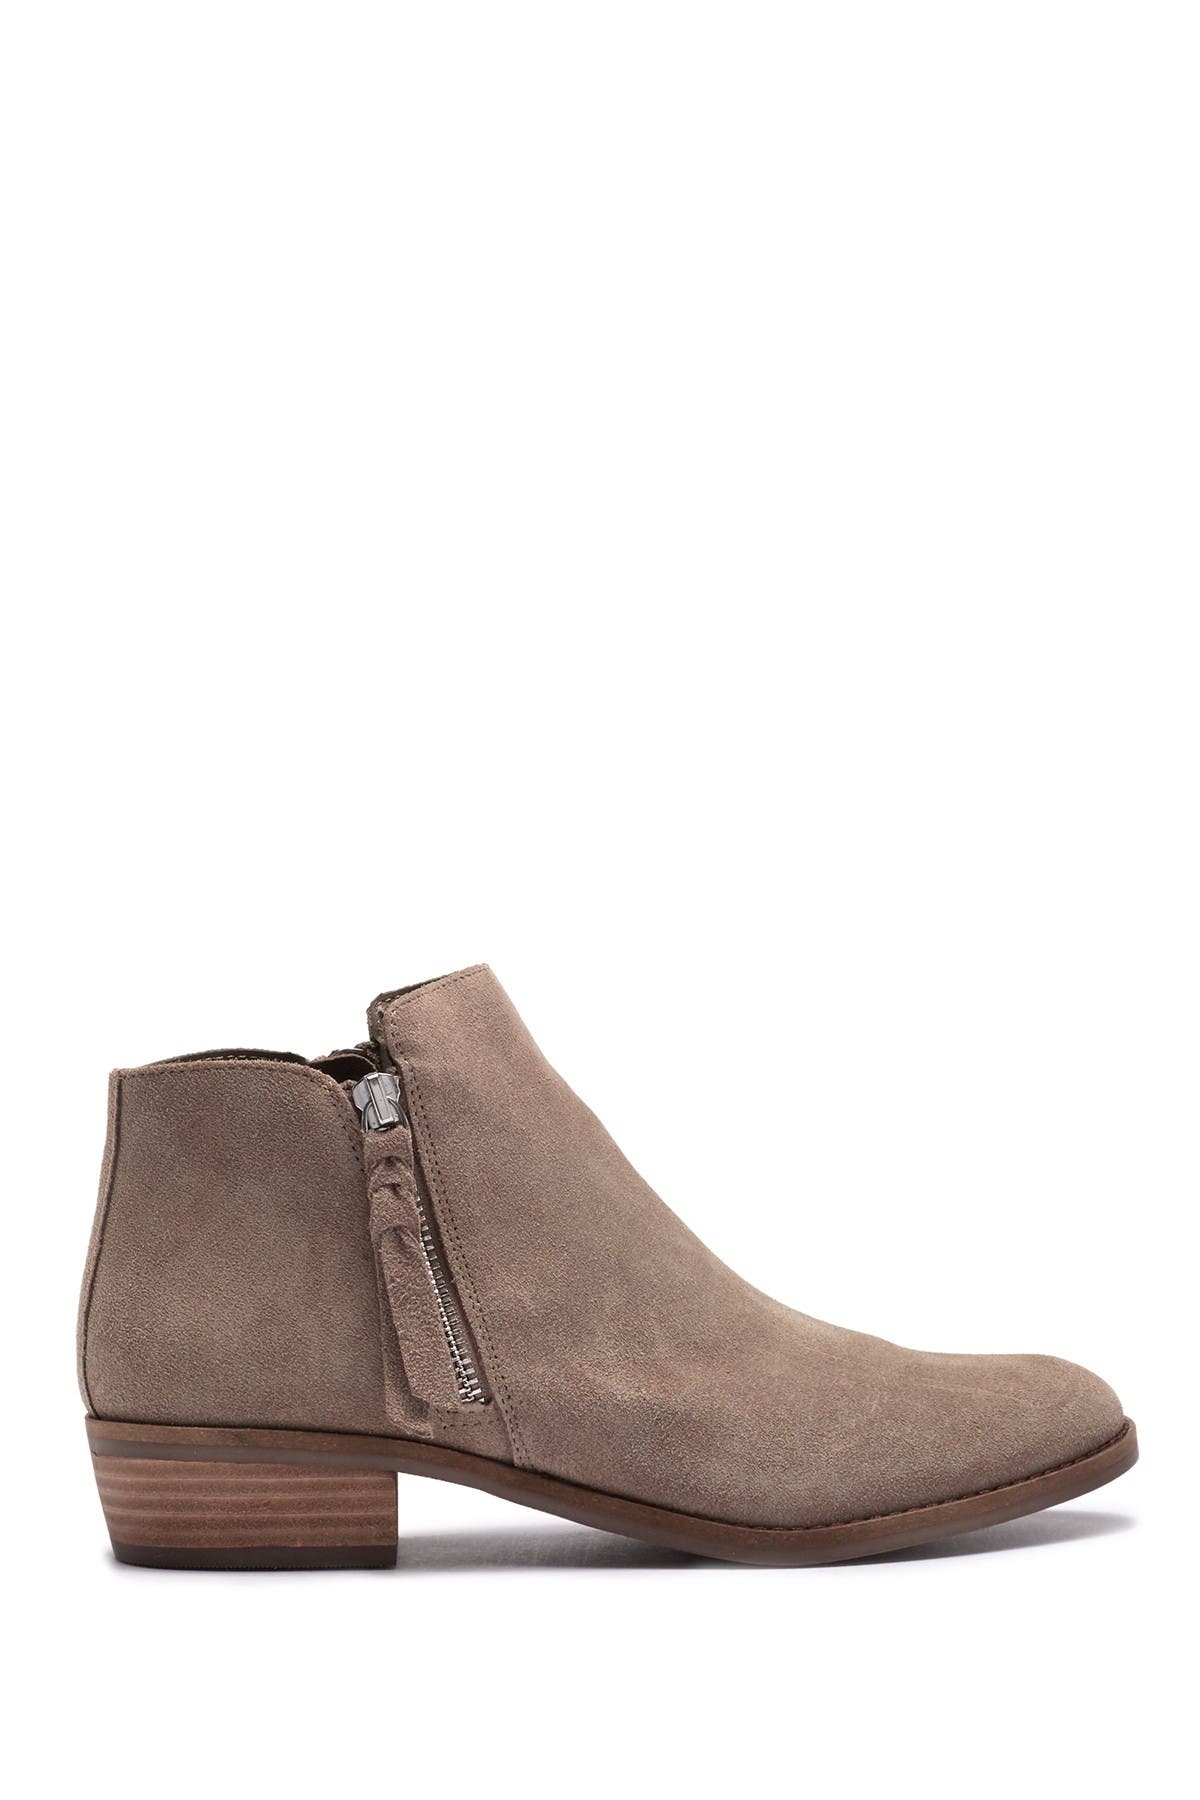 Dolce Vita | Sydnie Suede Ankle Boot 